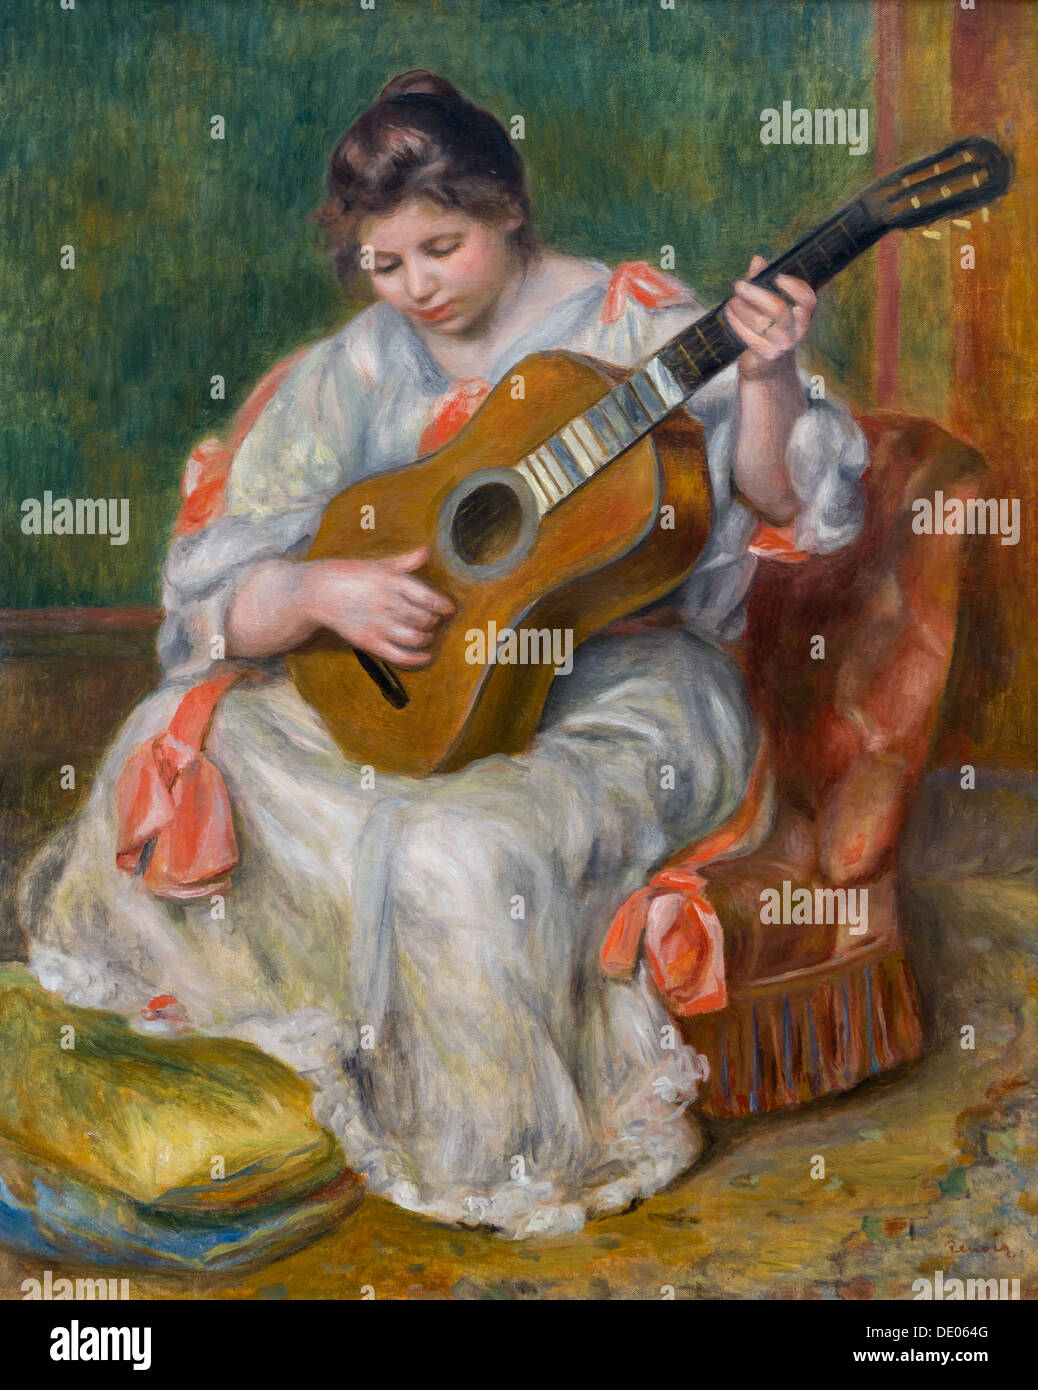 19th century  -  Woman playing Guitar, 1897 - Pierre Auguste Renoir Philippe Sauvan-Magnet / Active Museum oil on canvas Stock Photo